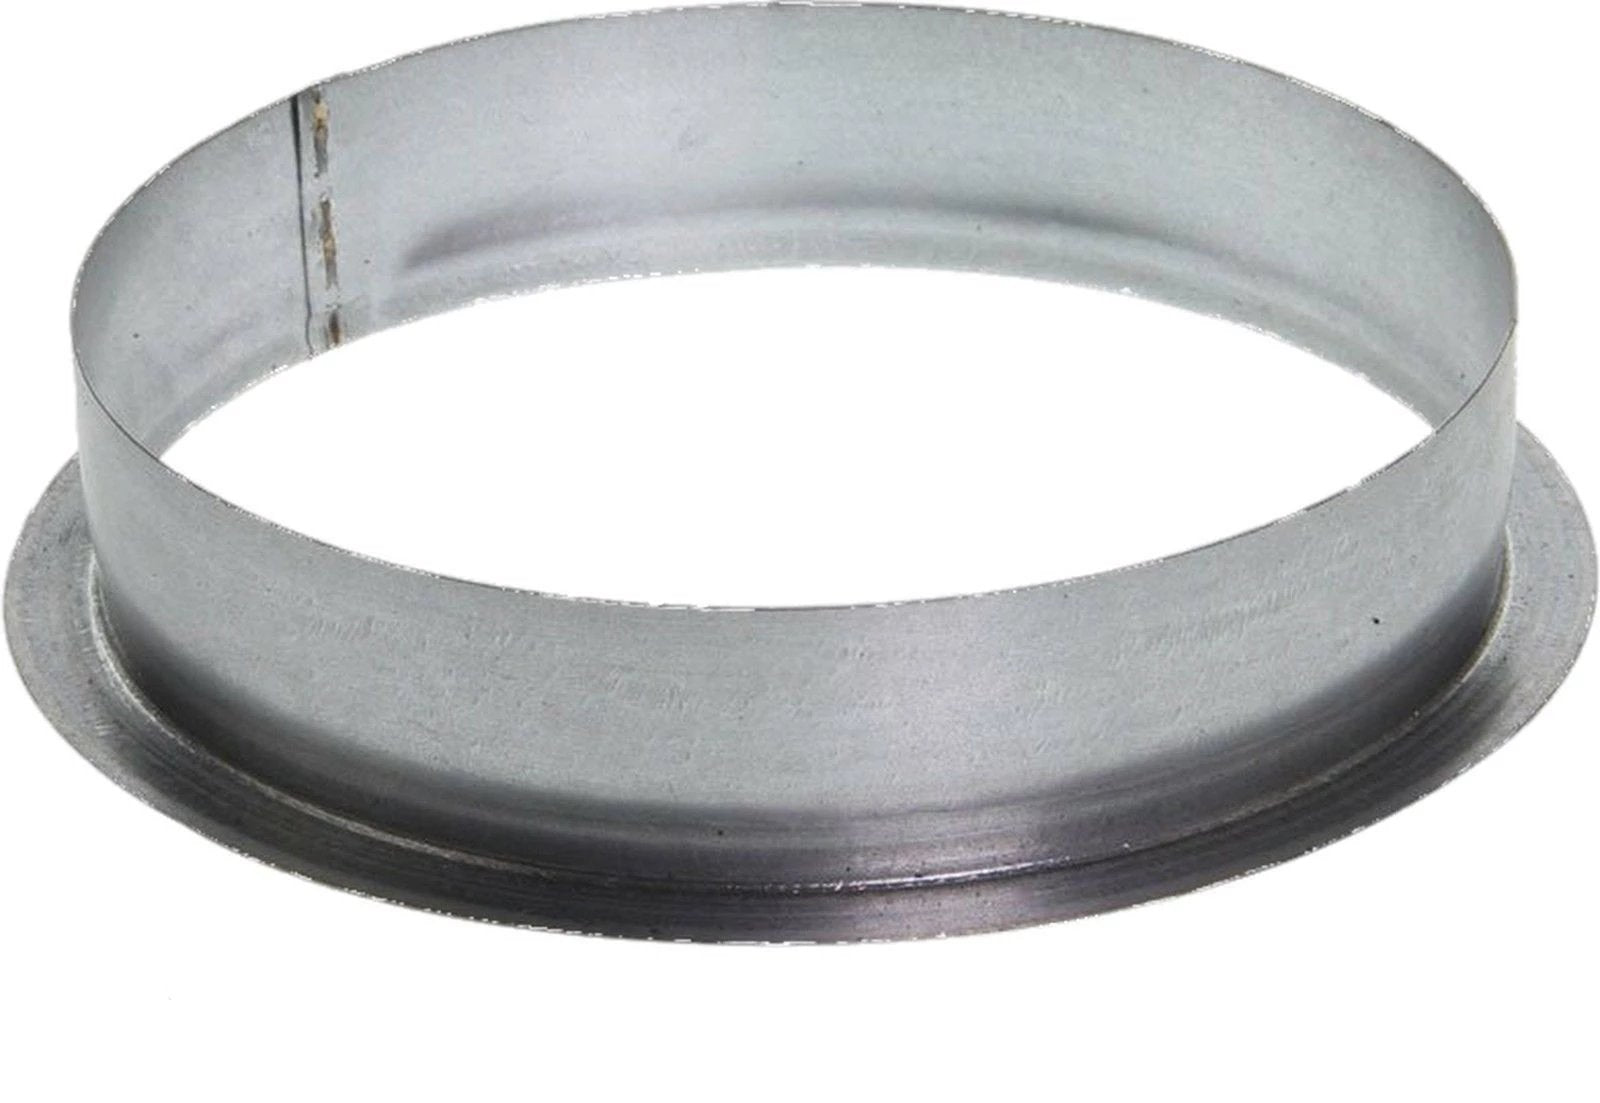 METAL Wall Flange Ducting Connector